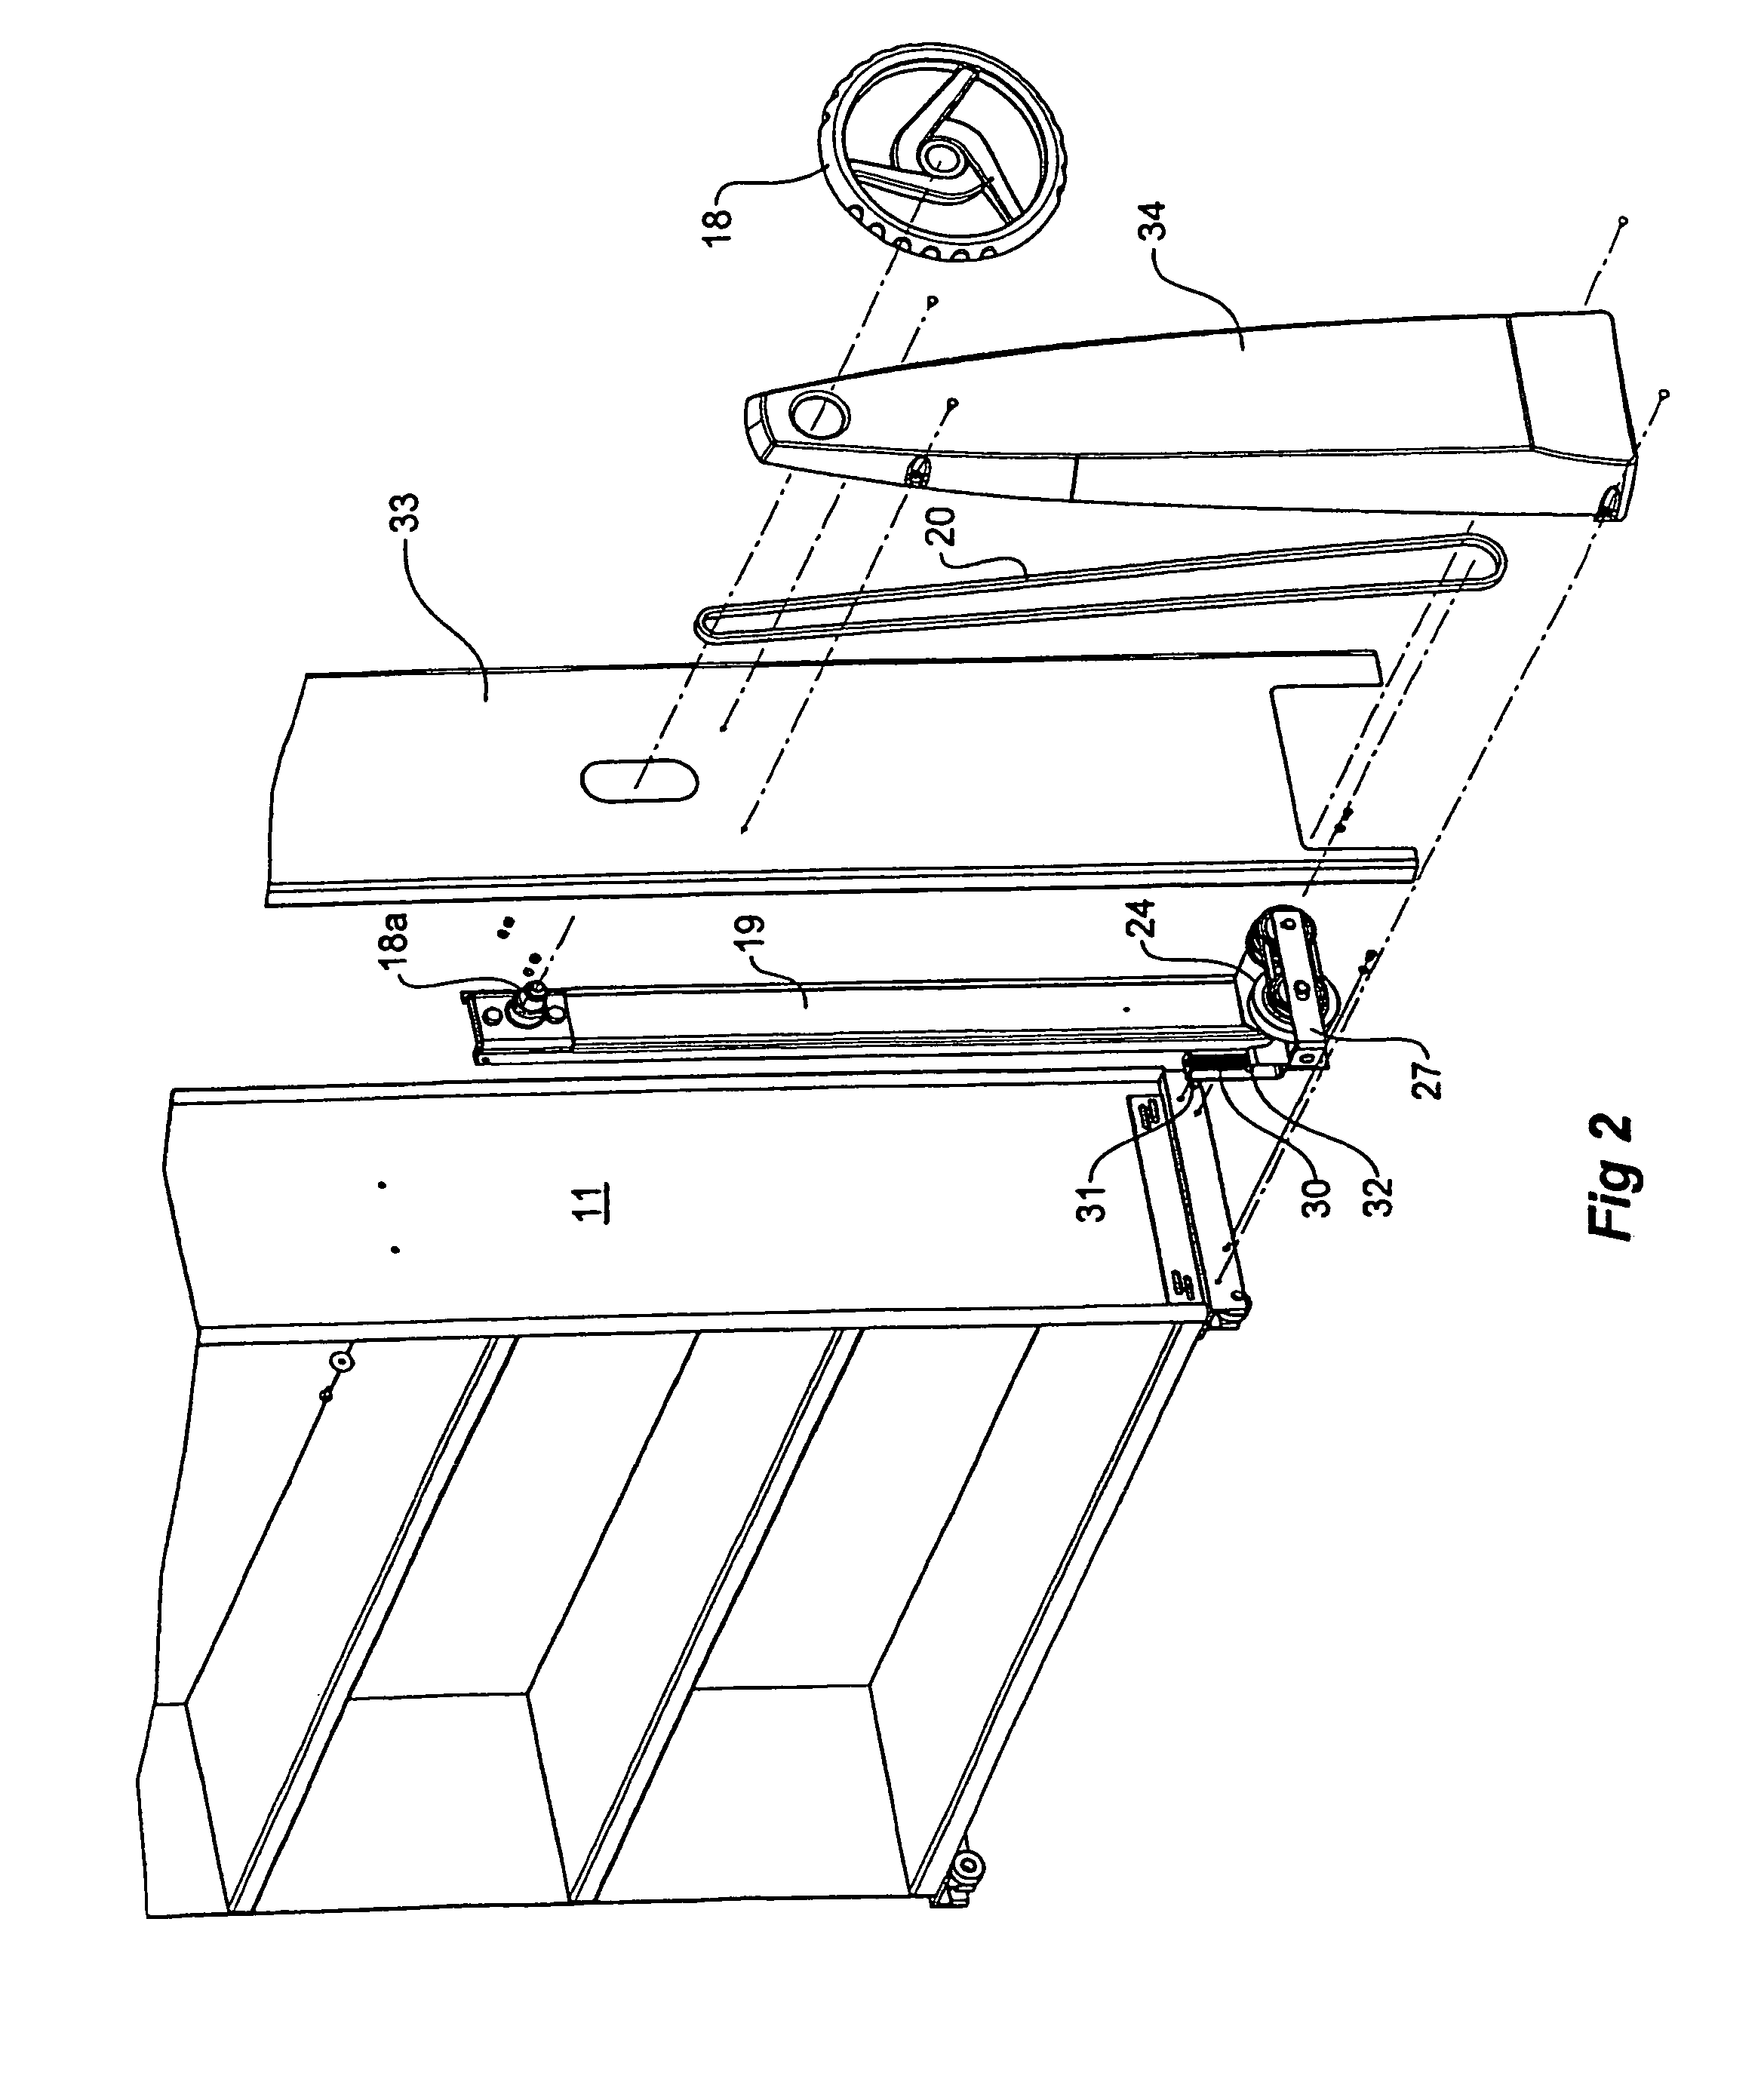 Drive mechanism for a track mounted body